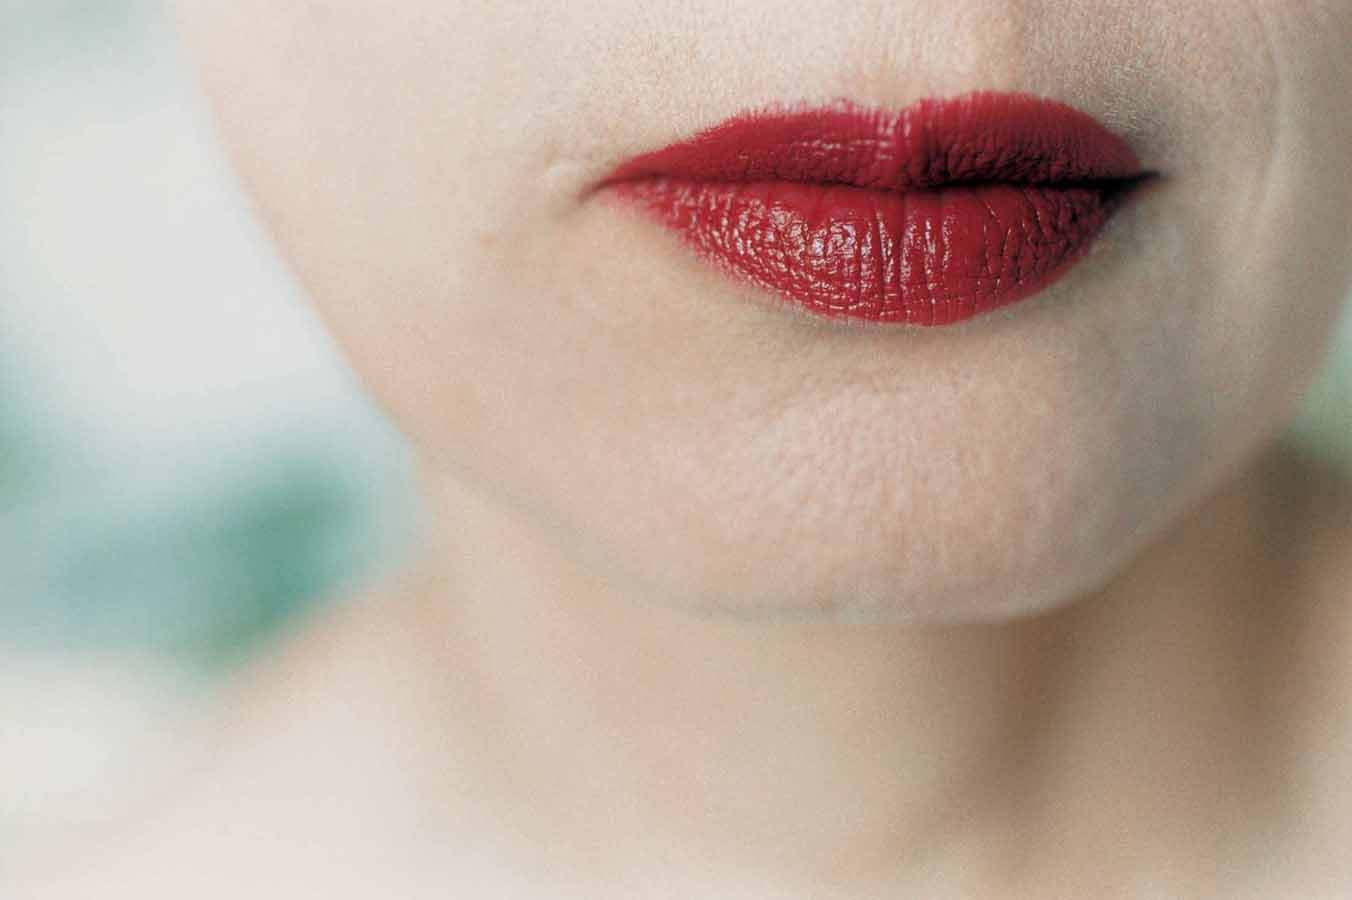 Her mother's lips in red lipstick, by Elinor Carucci